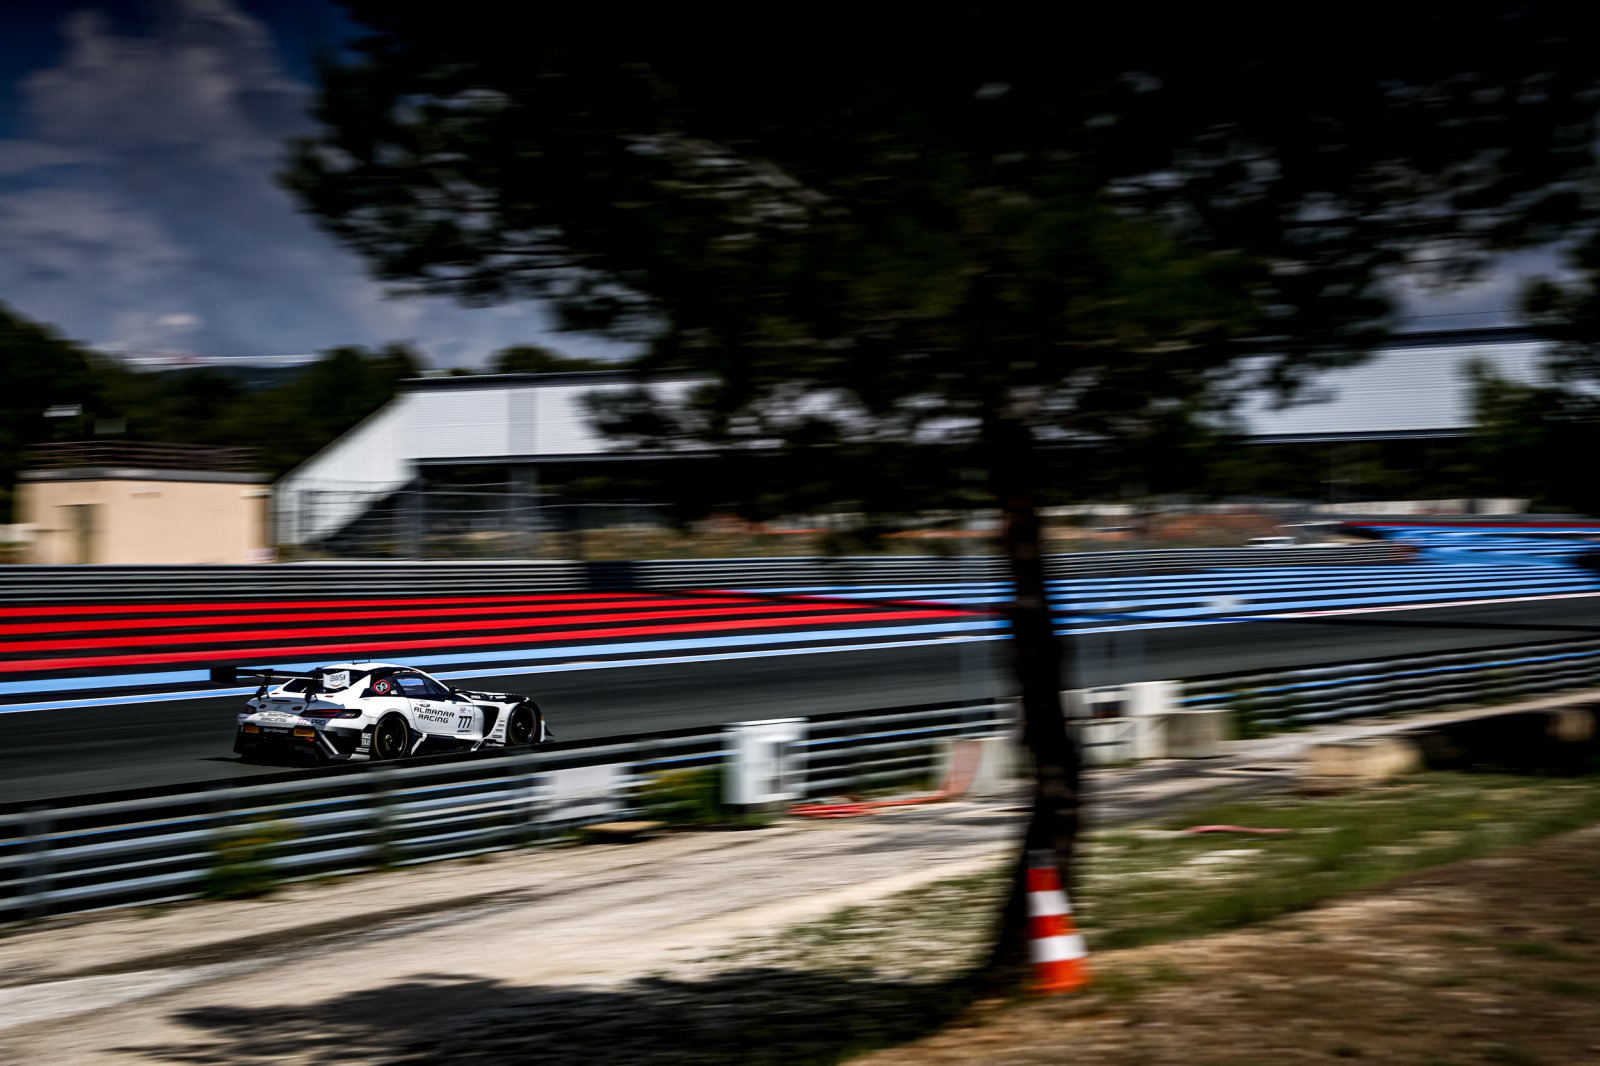 Mercedes-AMG squads hit the front in Free Practice at Circuit Paul Ricard